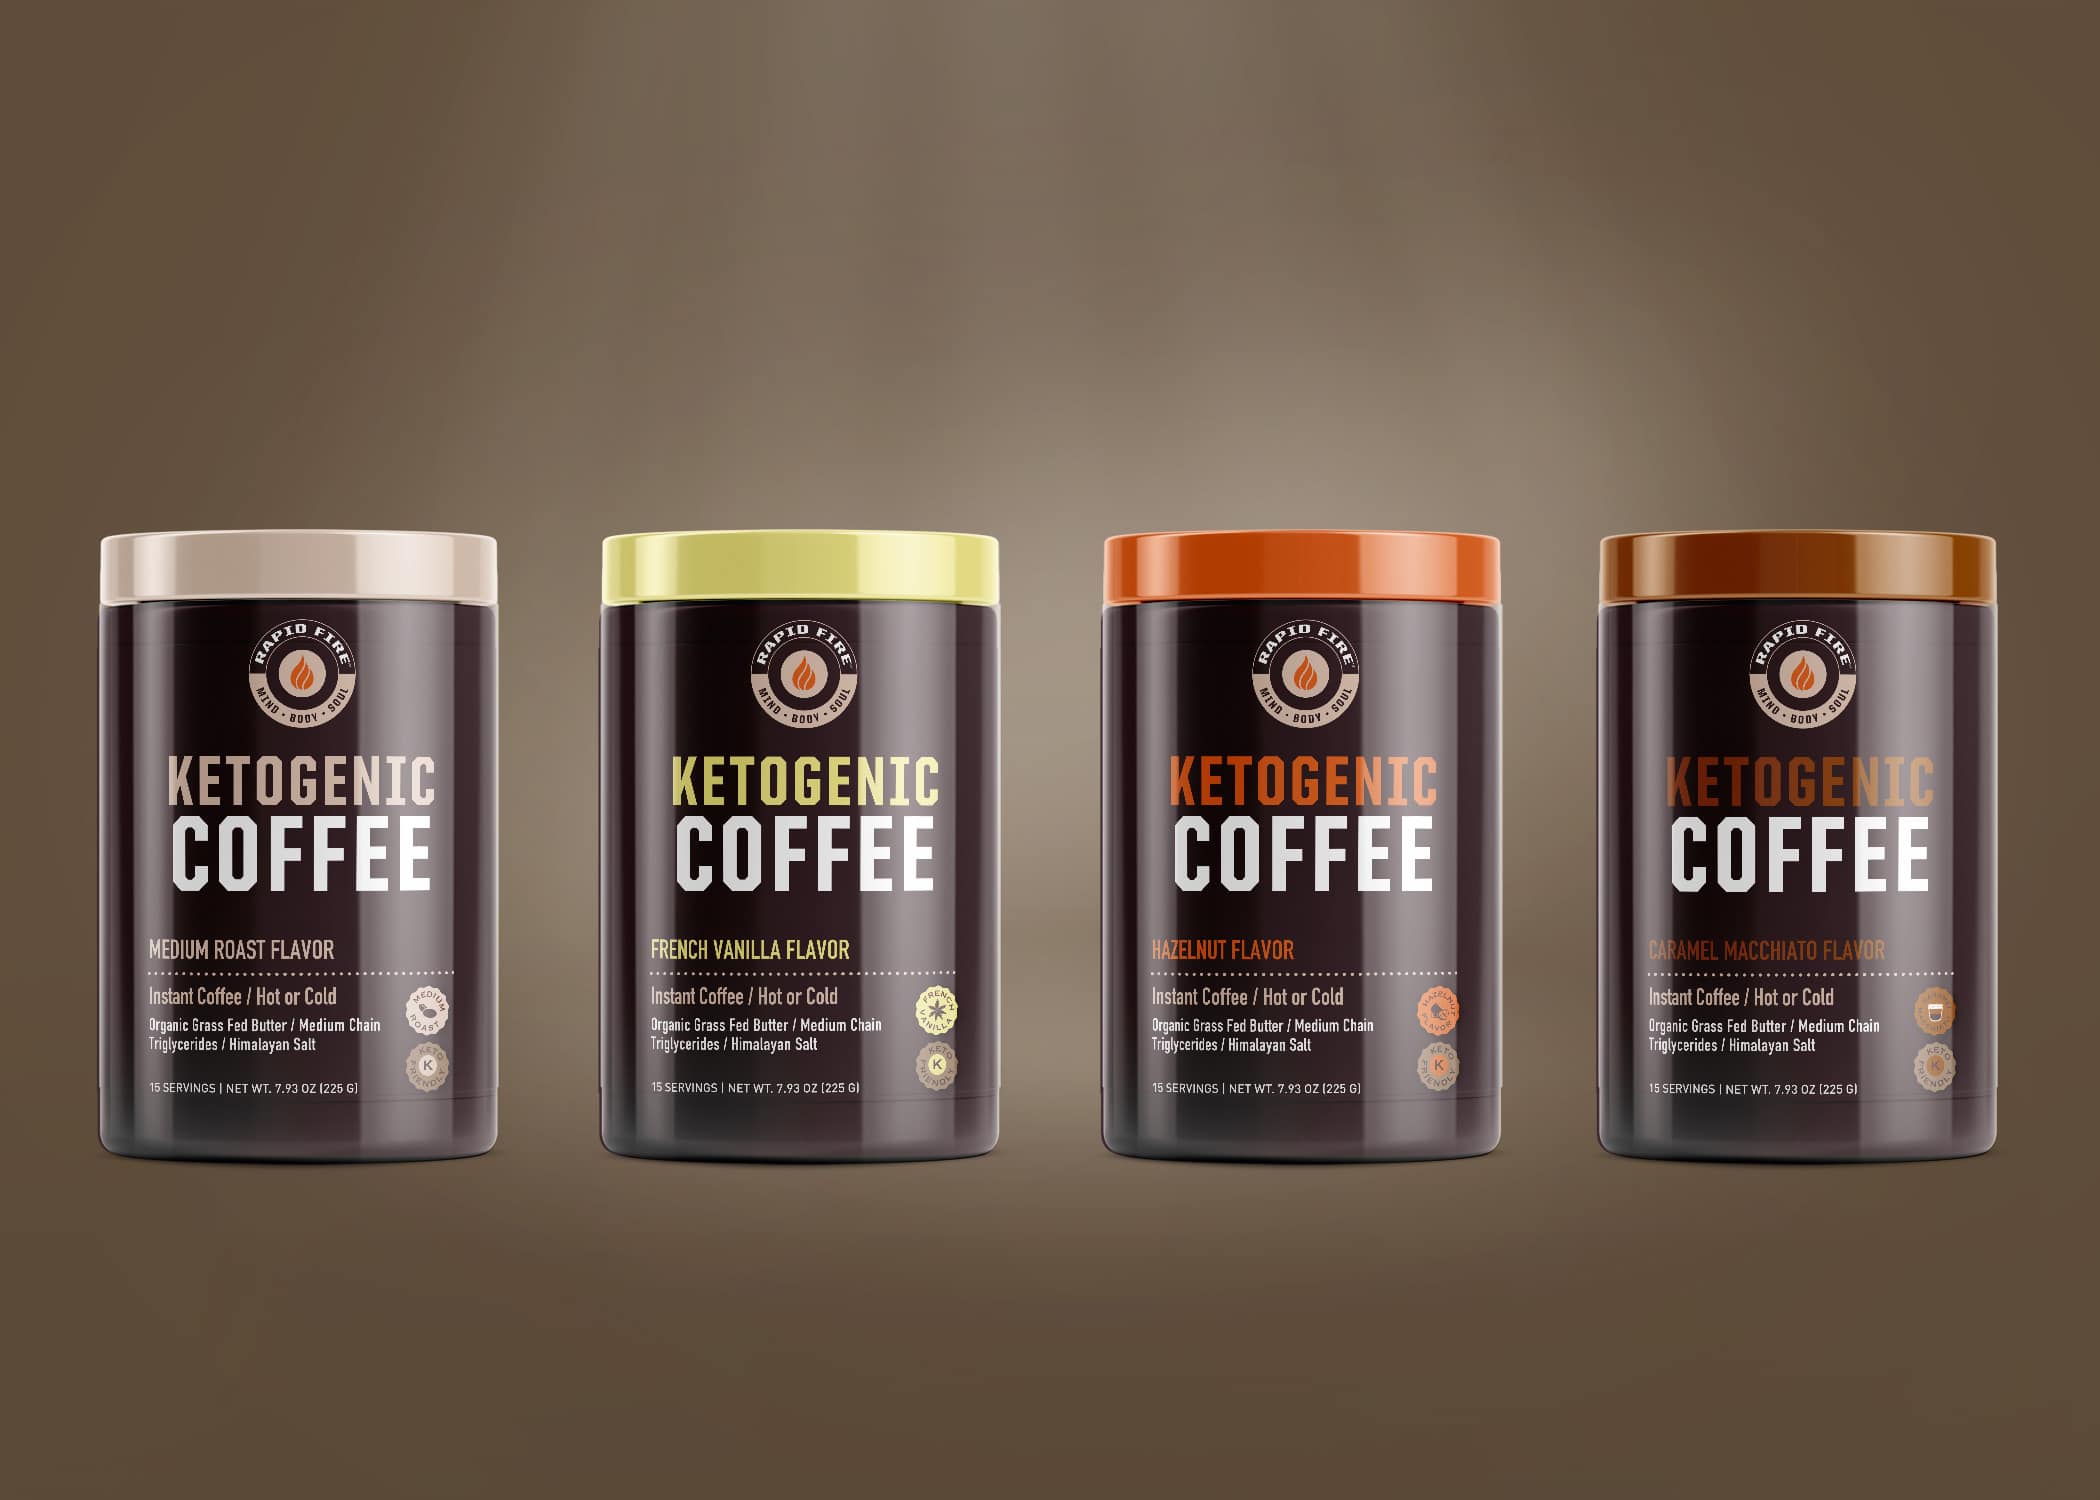 Rapid Fire wellness brand package design ketogenic coffee line with pops of color for the lids and brown containers arranged in a line.